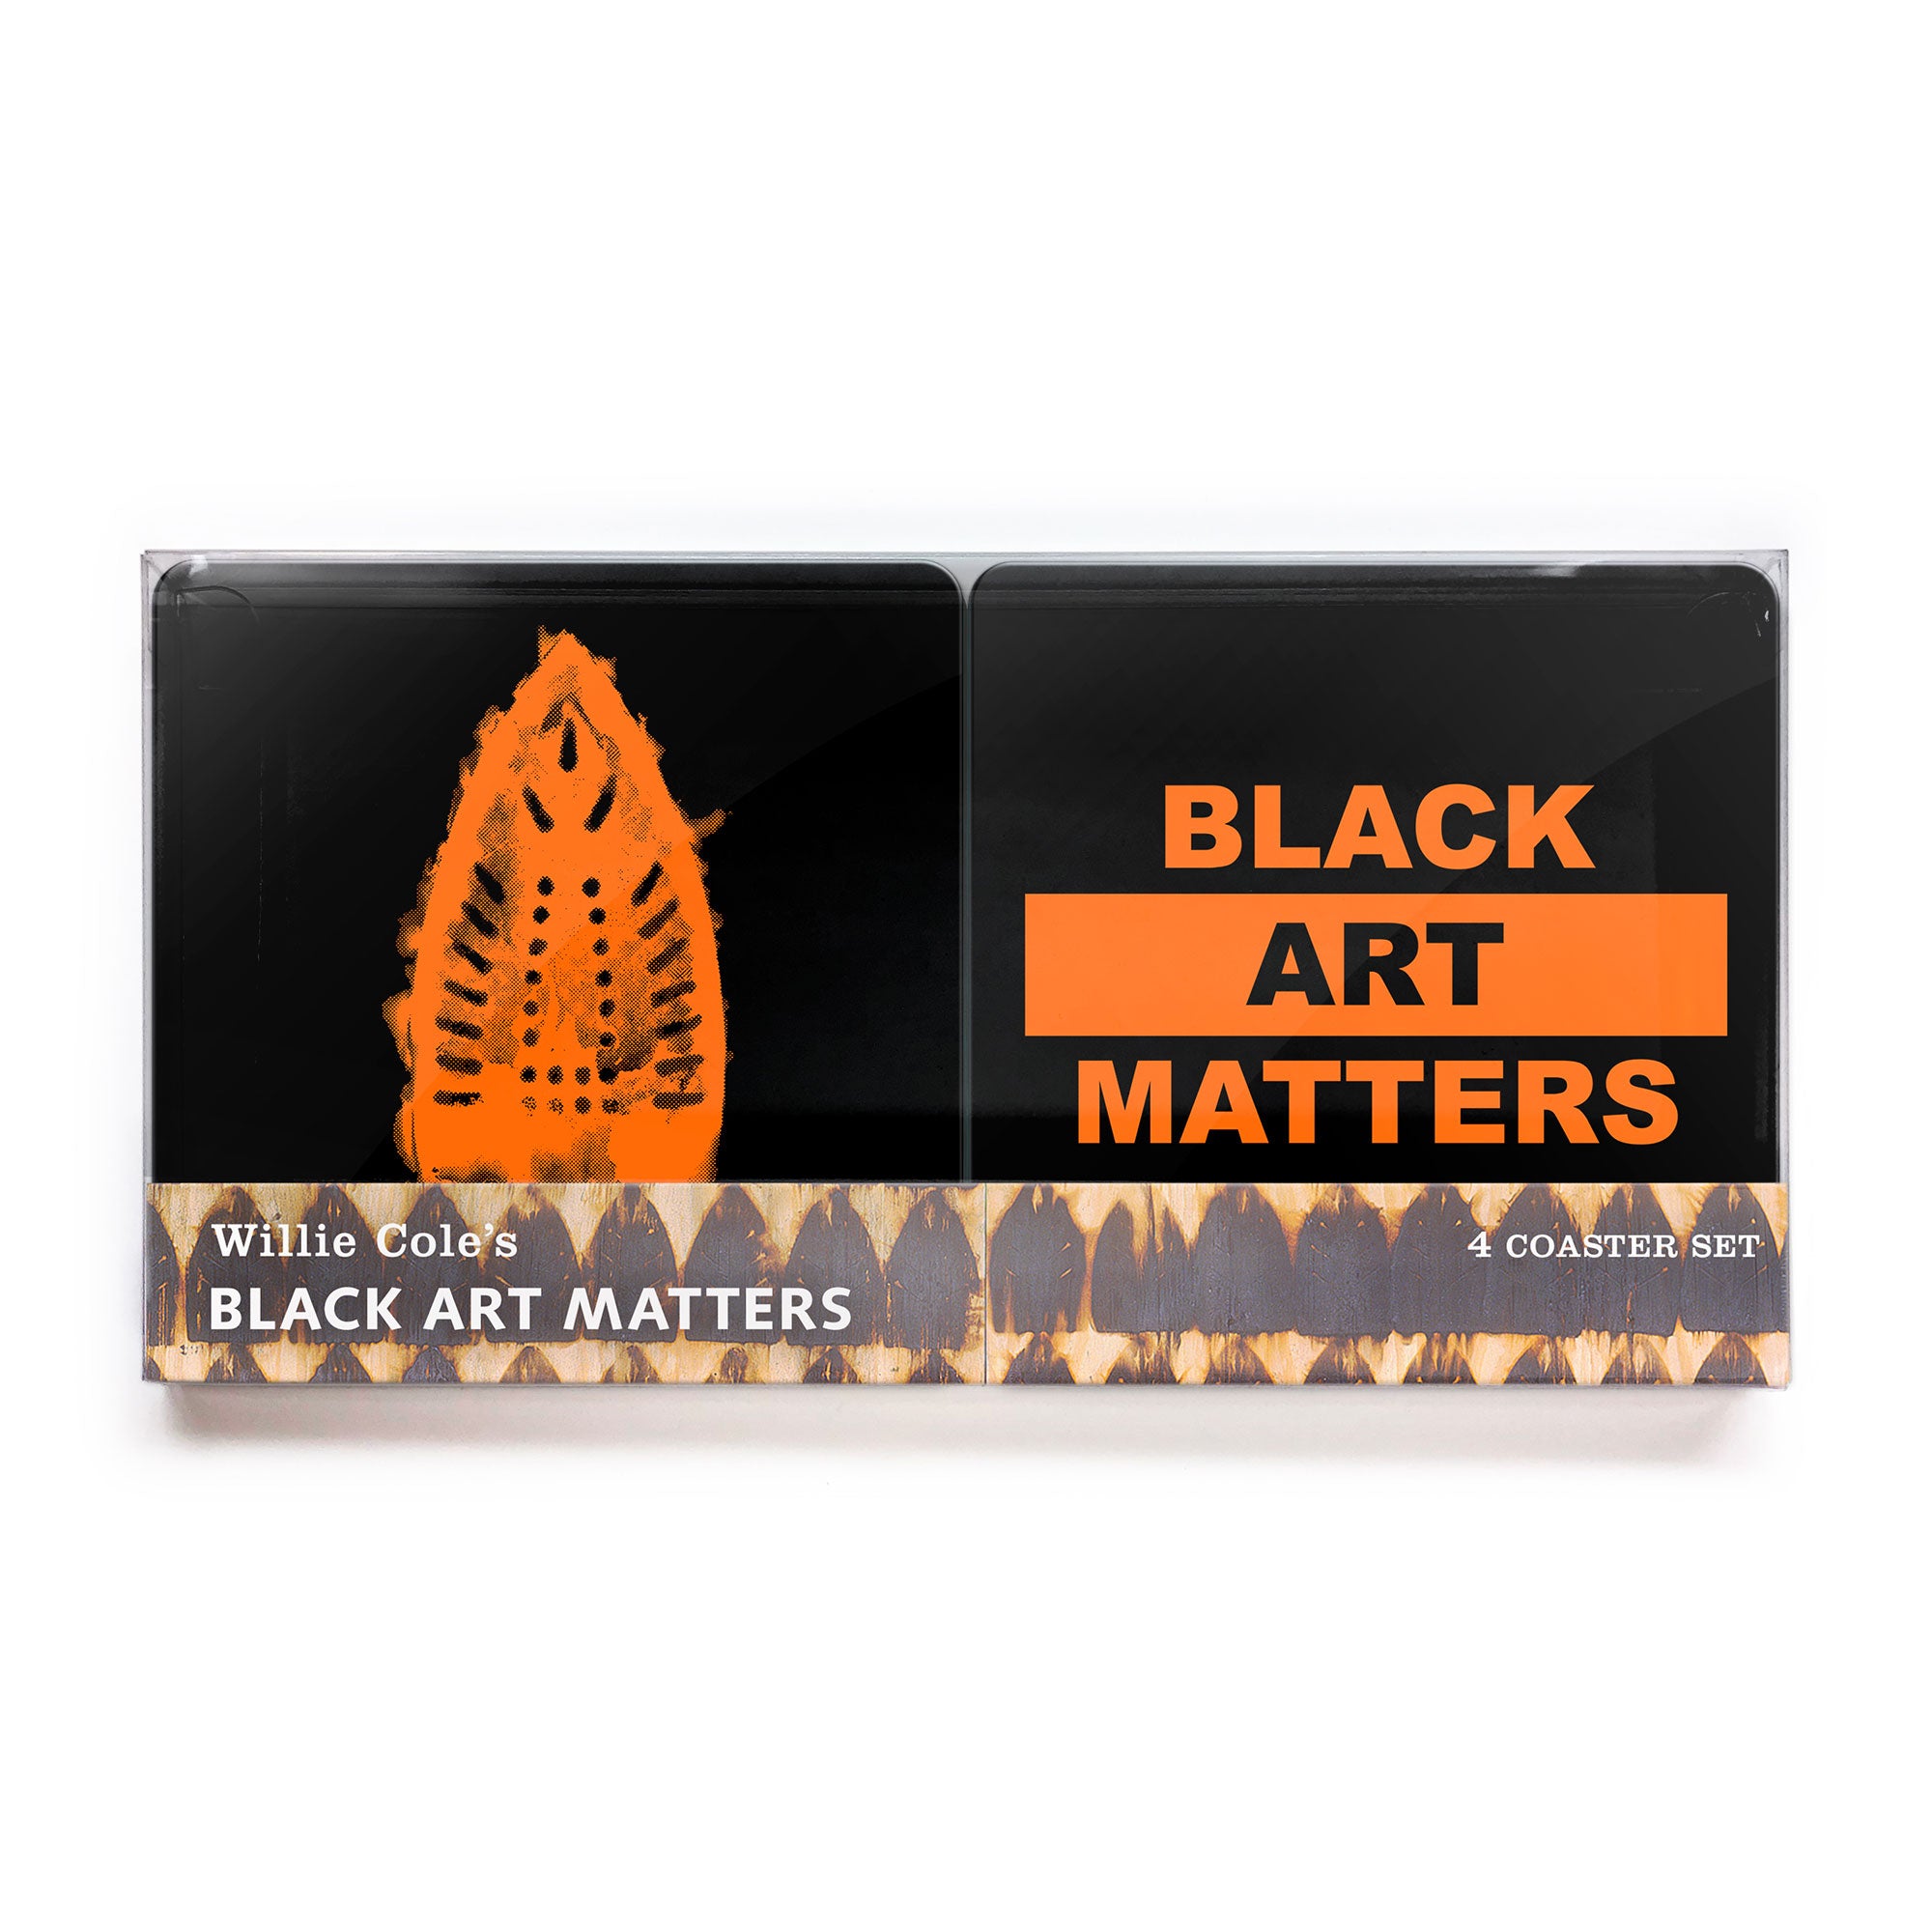 Willie Cole Black Art Matters Coaster 4-pack